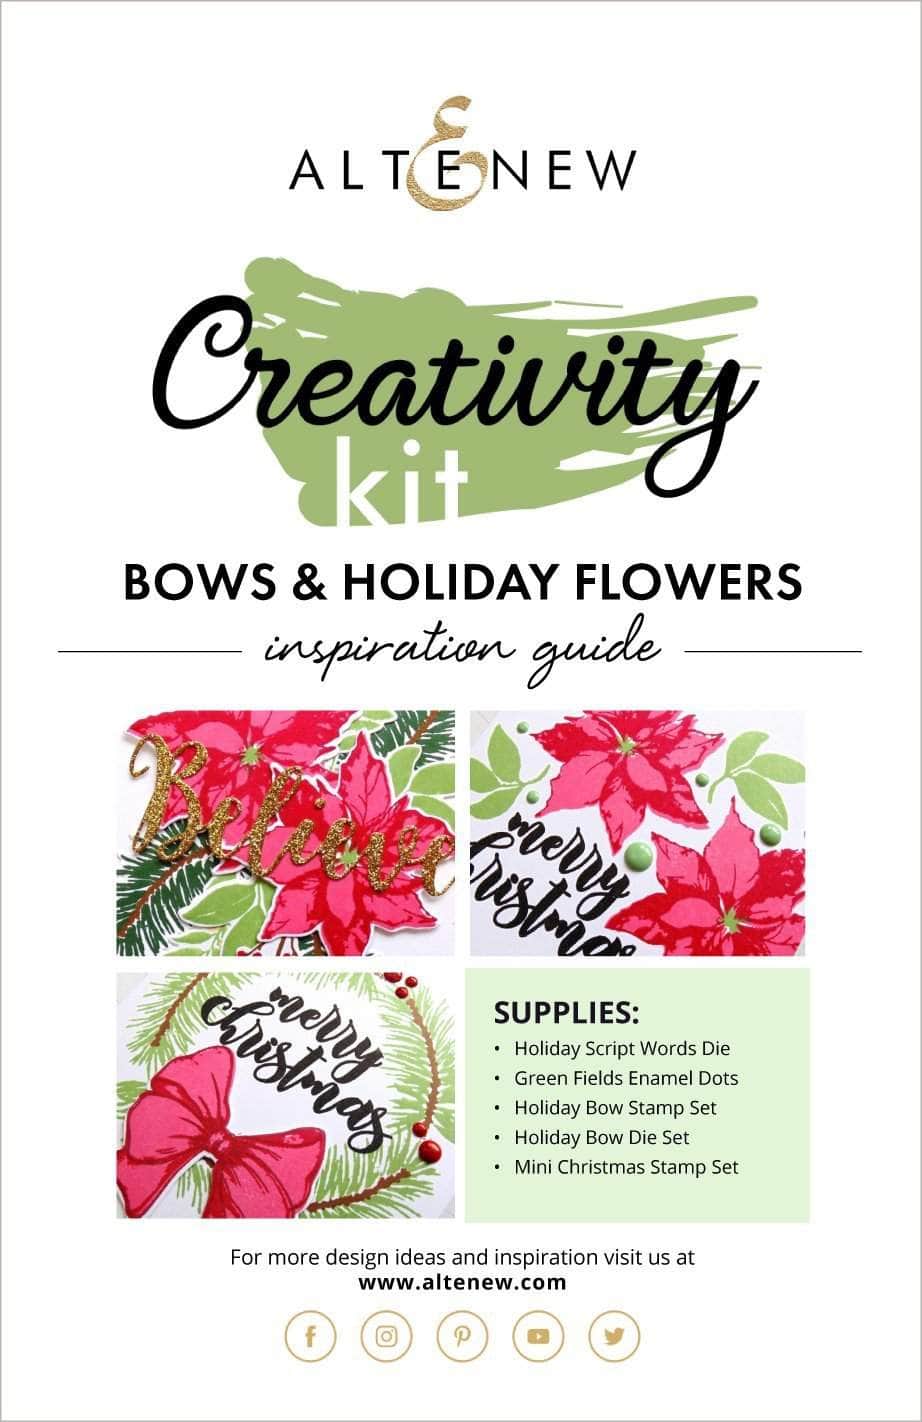 Printed Media Bows & Holiday Flowers Creativity Kit Inspiration Guide